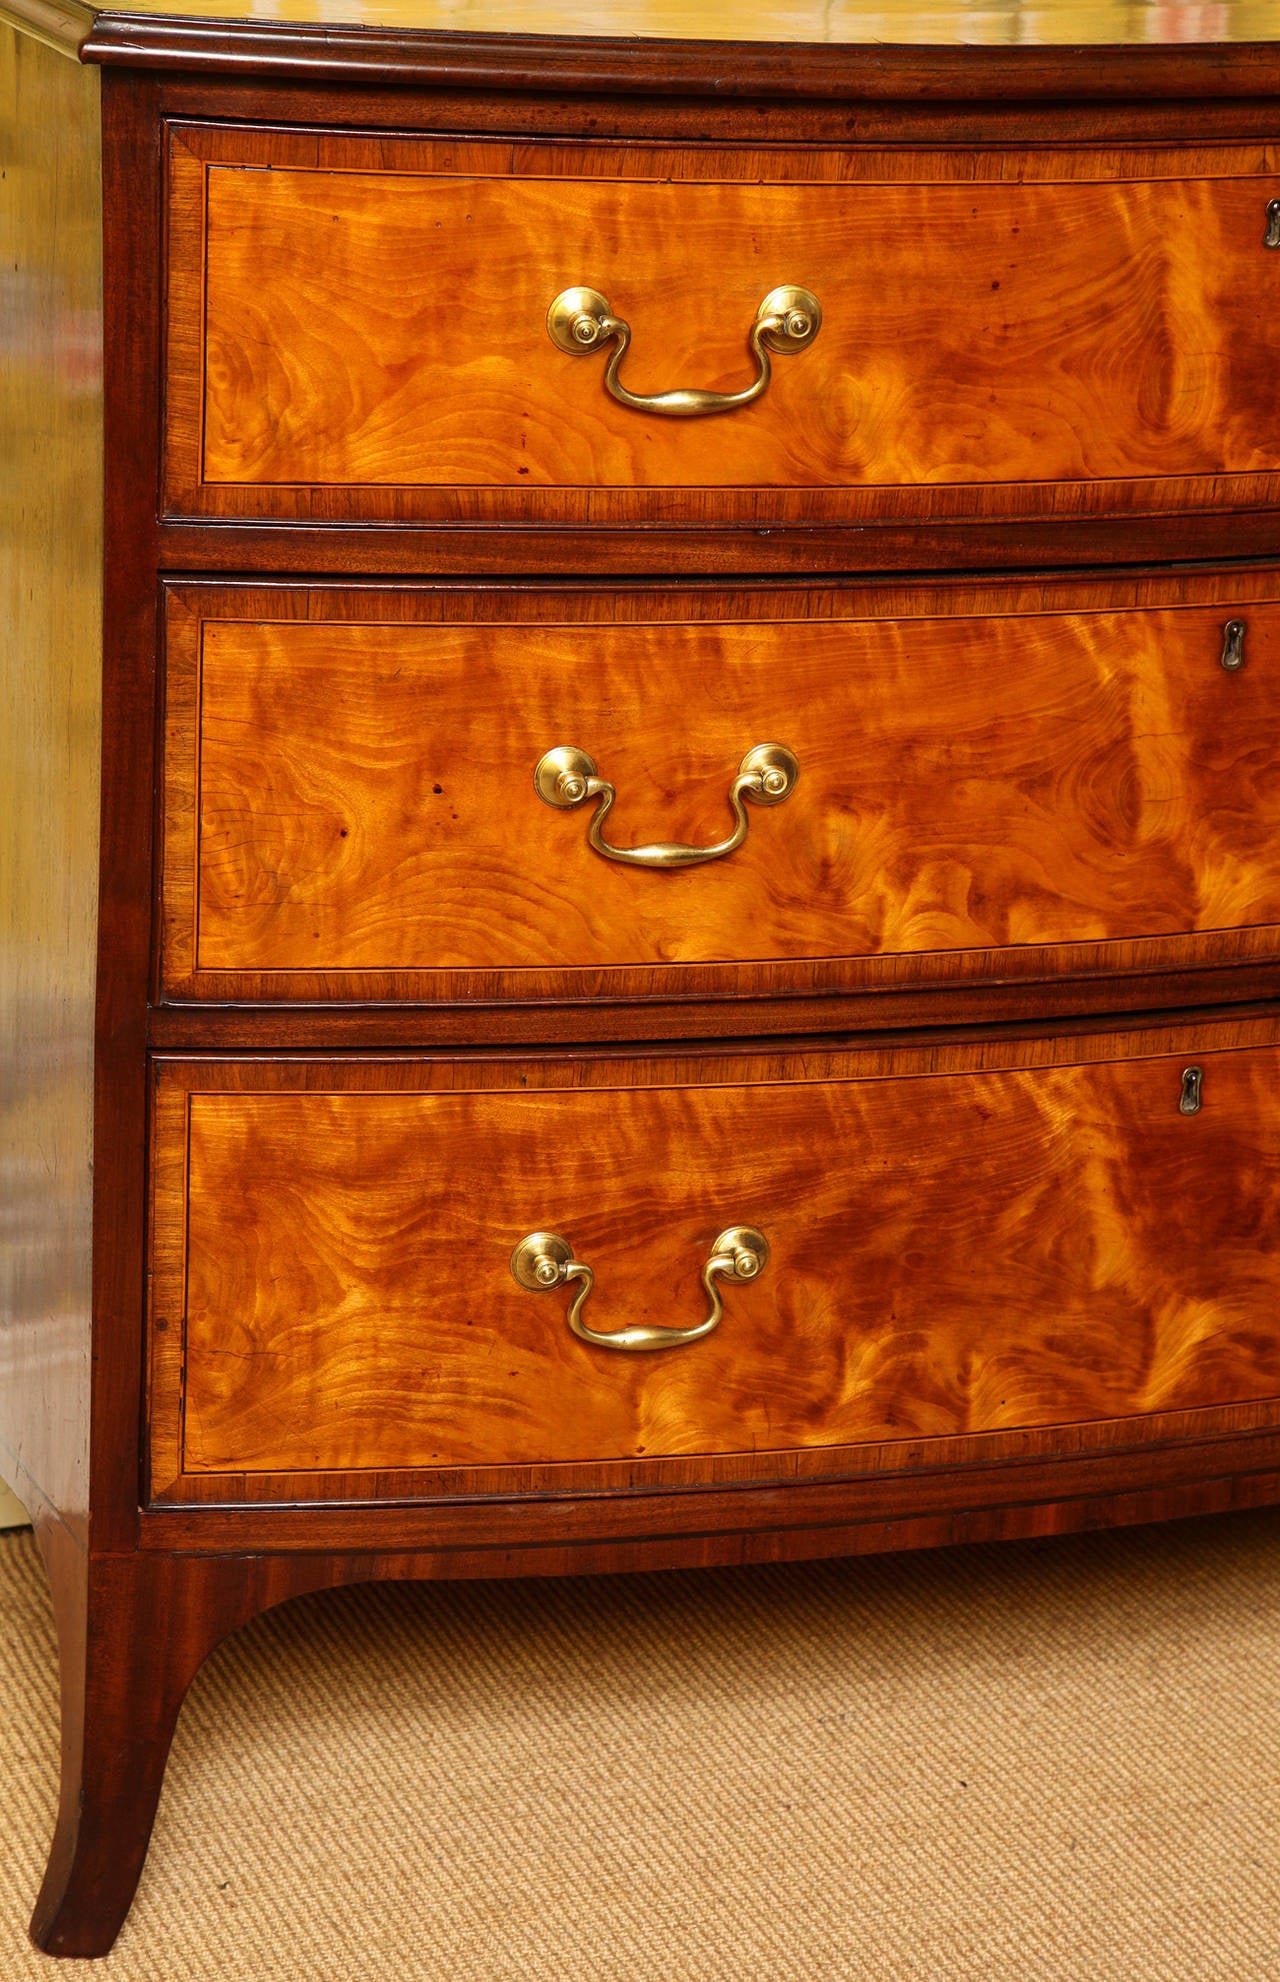 Late 18th Century Antique Sheraton Period Inlaid Satinwood Bowfront Chest of Drawers, circa 1780